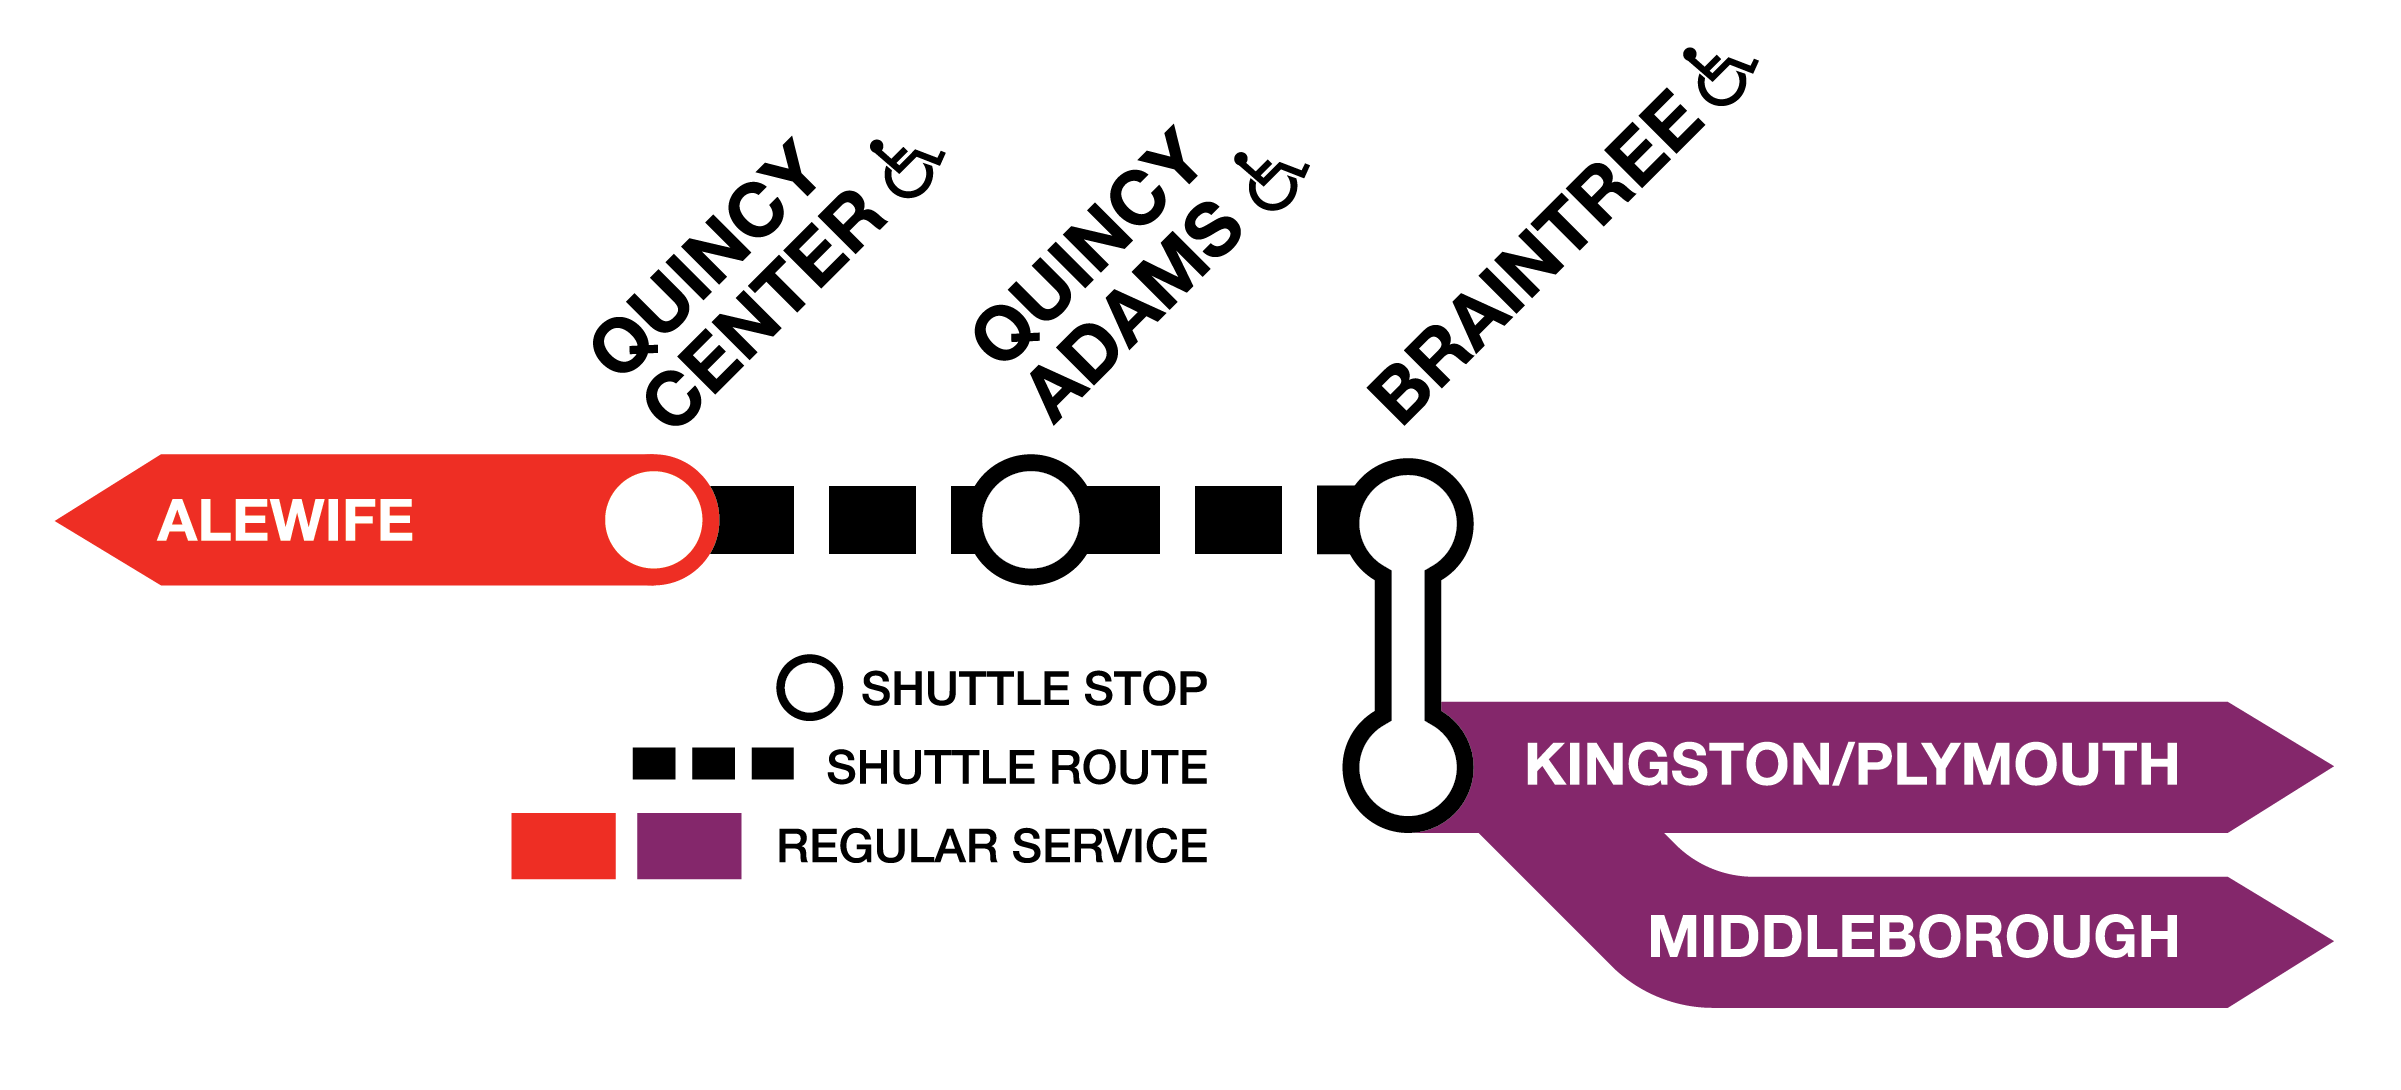 Diagram of the Red Line in the South Shore, showing the connecting Commuter Rail Lines at Braintree. Shuttles run between Quincy Center and Braintree, and the Middleborough and Kingston/Plymouth Lines terminate at Braintree, whre riders can transfer to the Red Line bus shuttle.